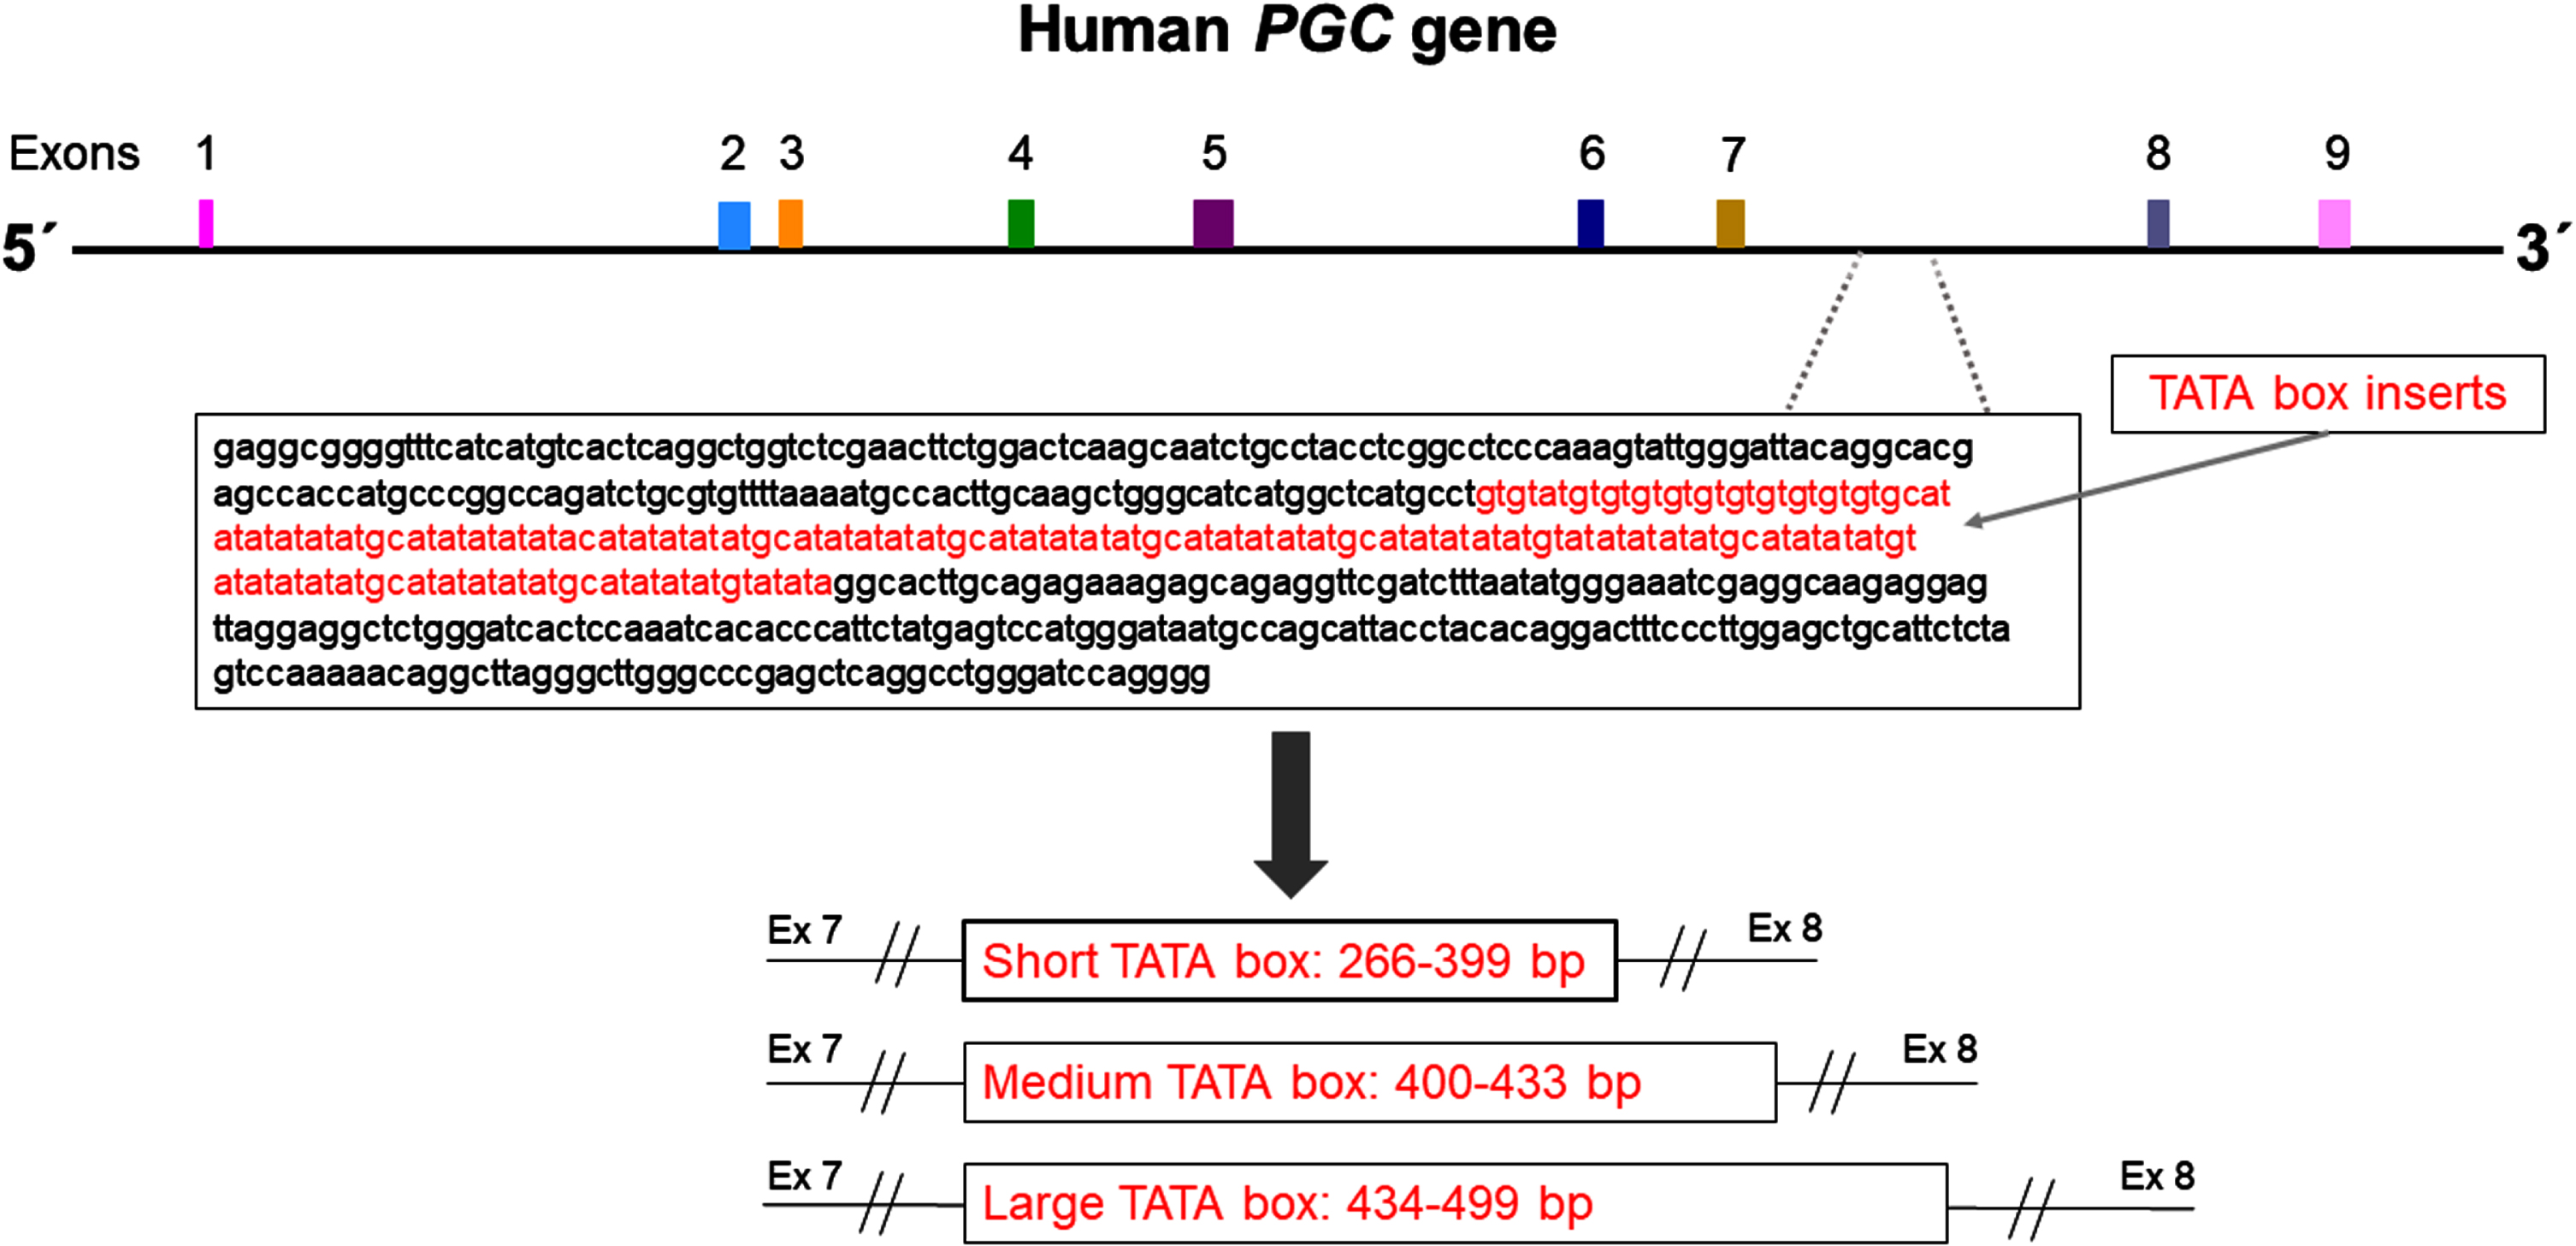 Structure of human Progastricsin (PGC) gene. The 100-bp insertion/deletion polymorphism located between exons 7 and 8 is shown, different size of alleles/repeats in TATA box are grouped as short, medium and large. [Modified from 13].